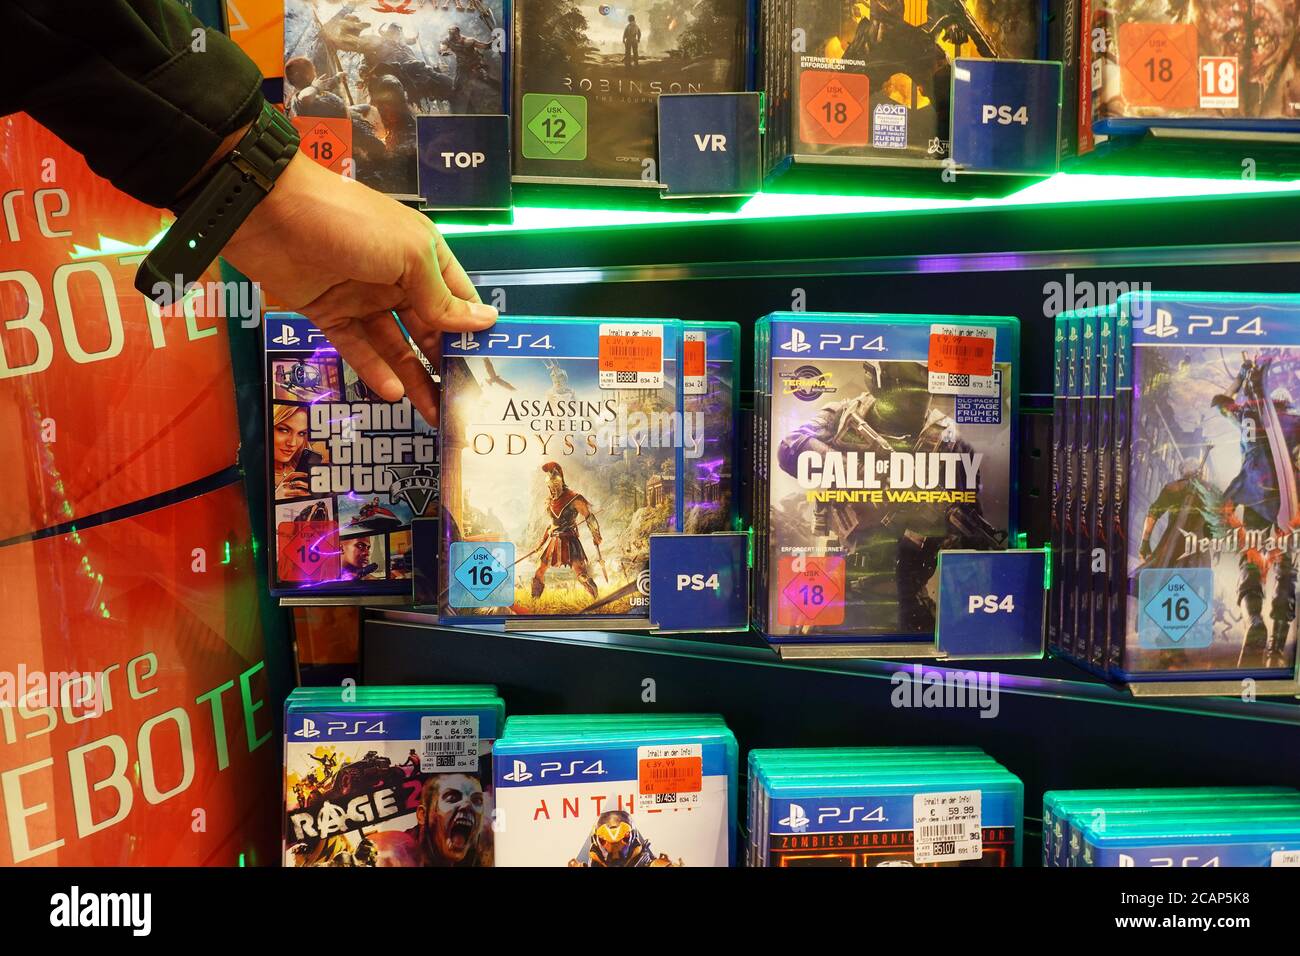 PS4 Assassin's Creed game in a shop Stock Photo